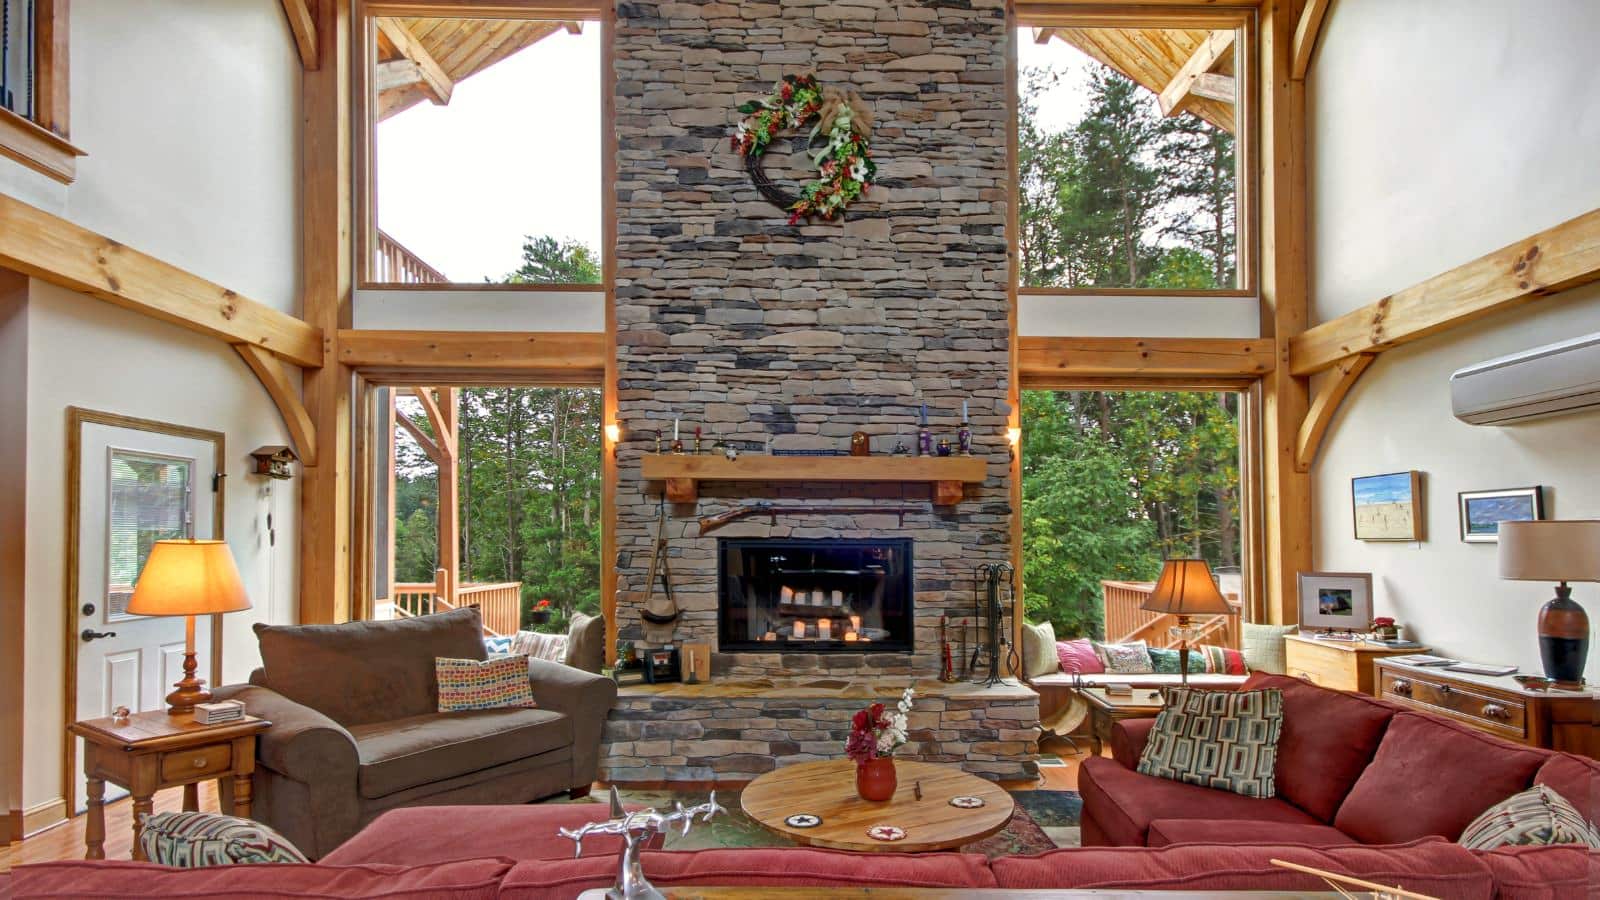 Great room with large stone fireplace, large red upholstered sectional, oversized brown upholstered chair, and large windows with views of green trees